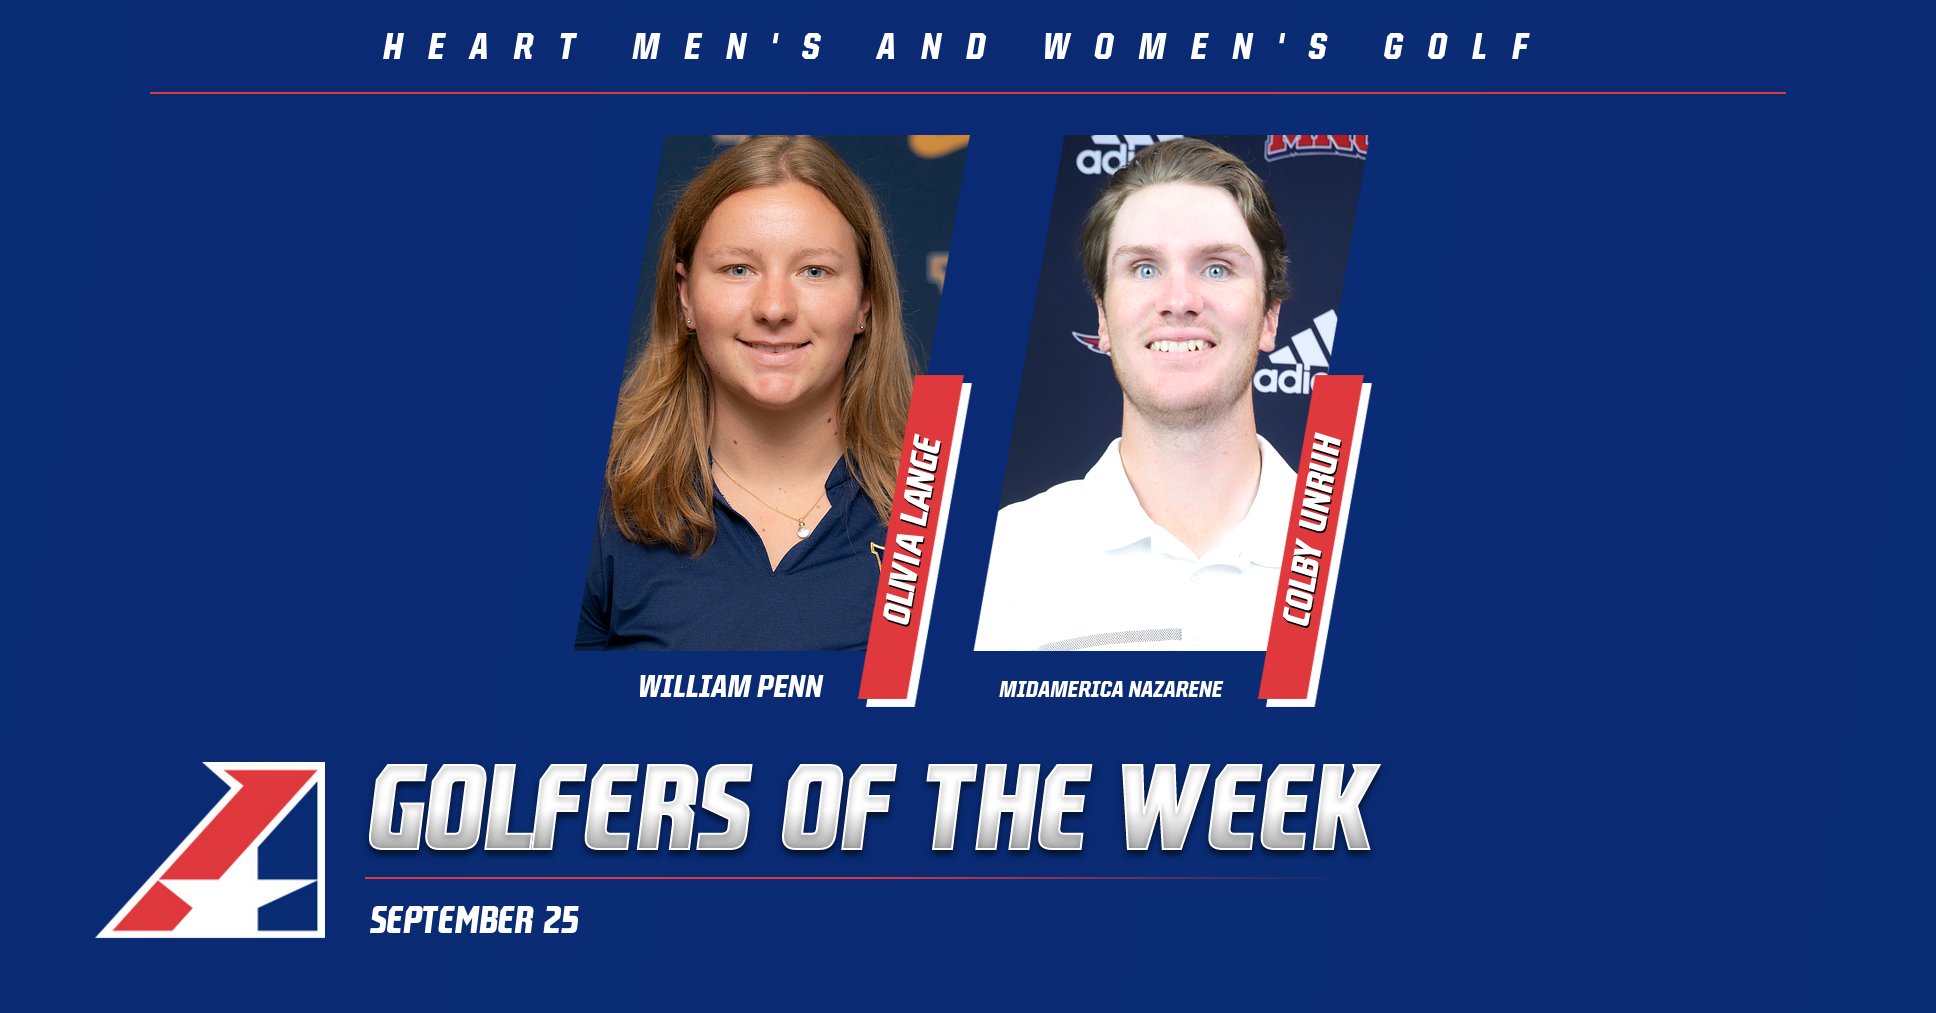 First Heart Men’s and Women’s Golfer of the Week Awards of the Season Announced